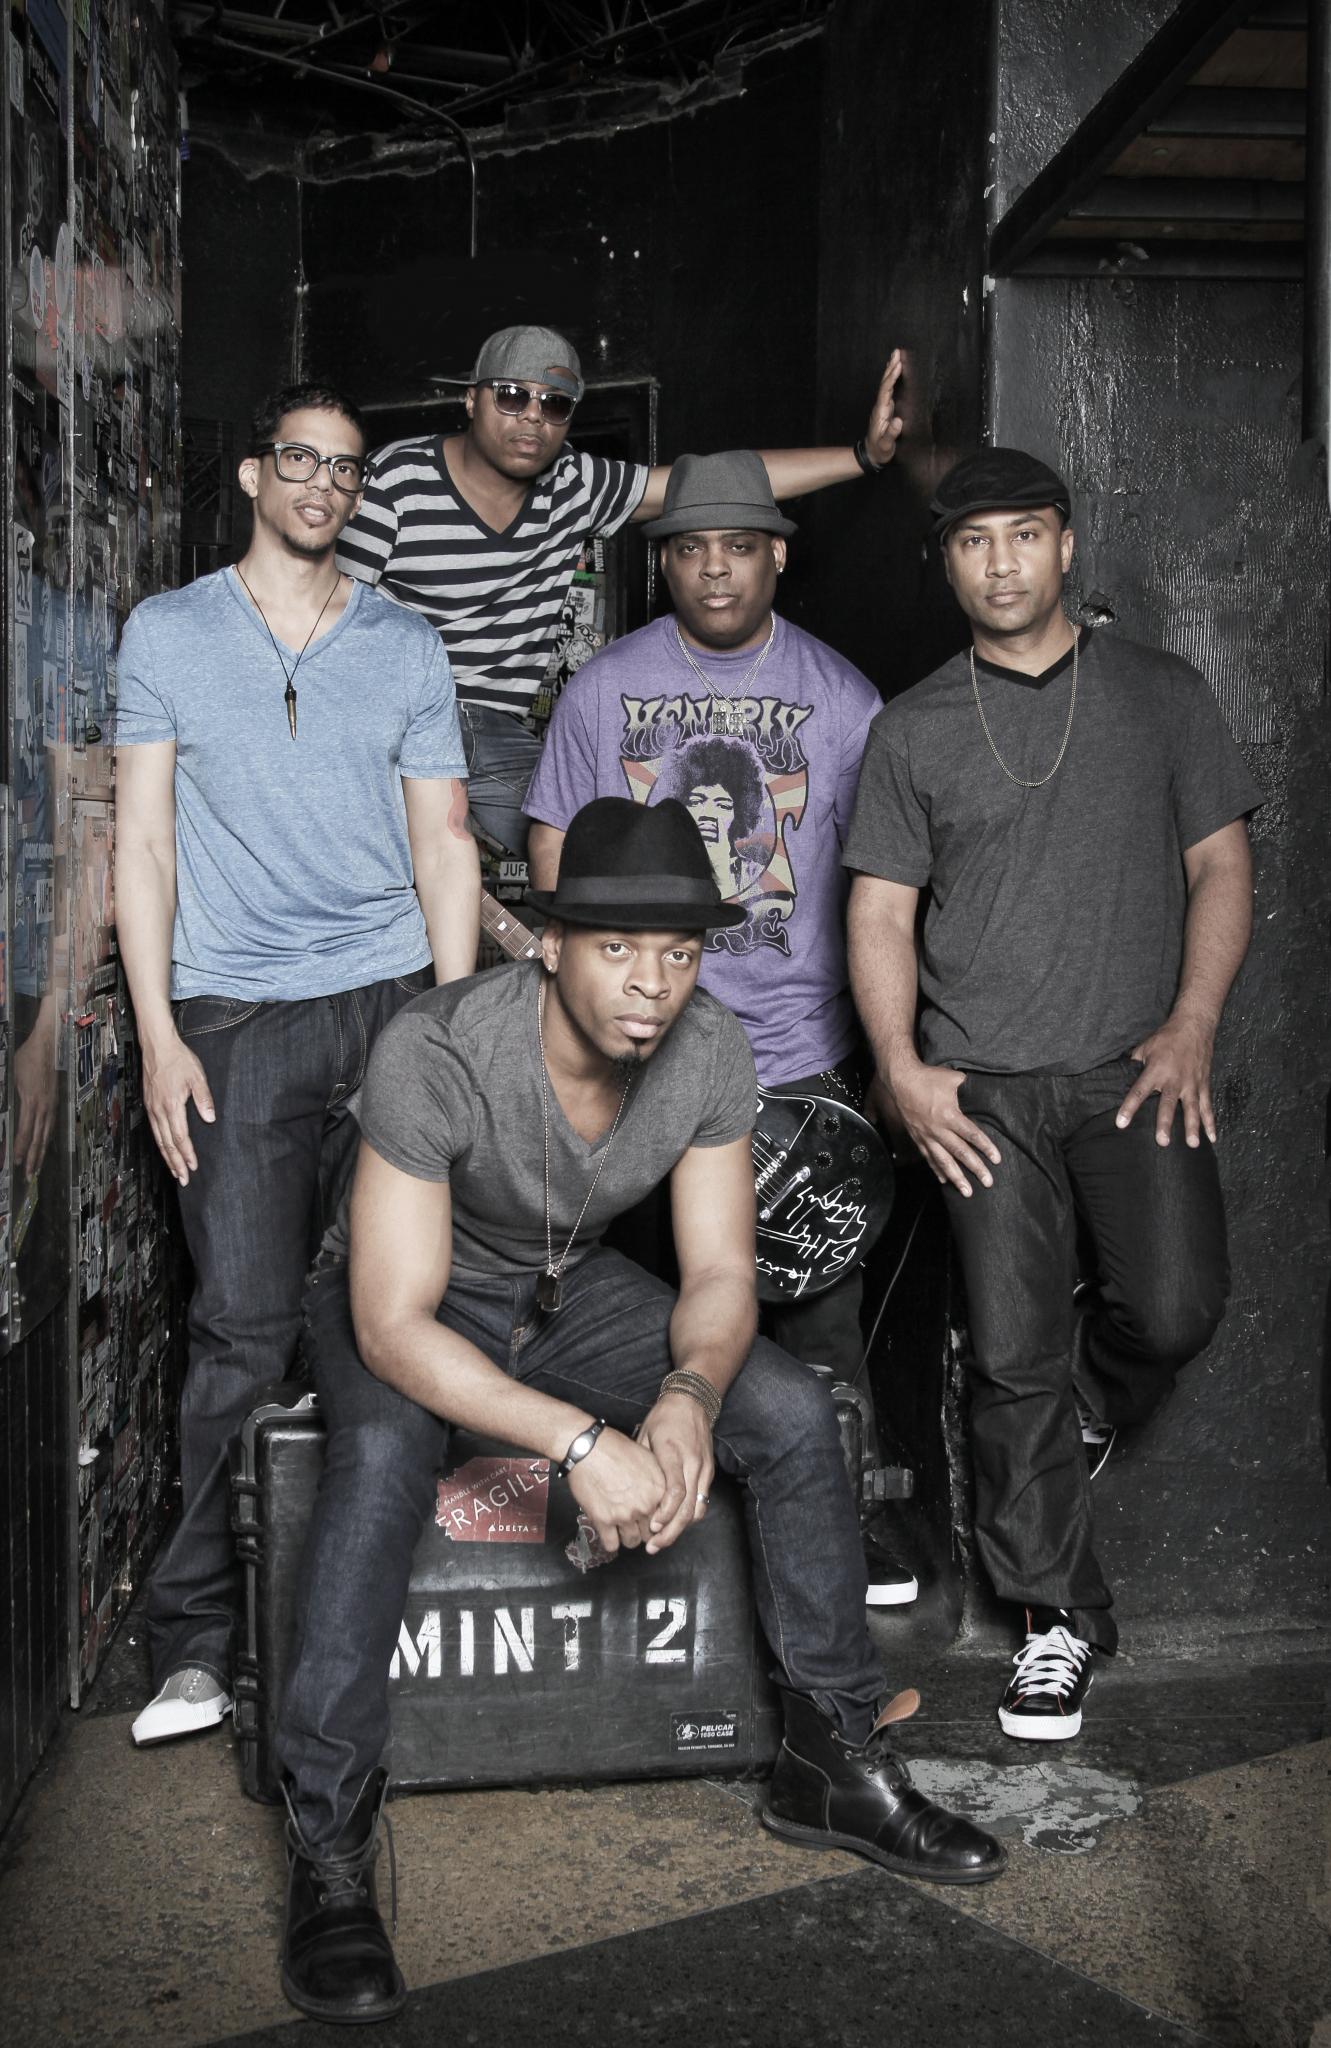 Hear Mint Condition's Music @ The Speed of Life